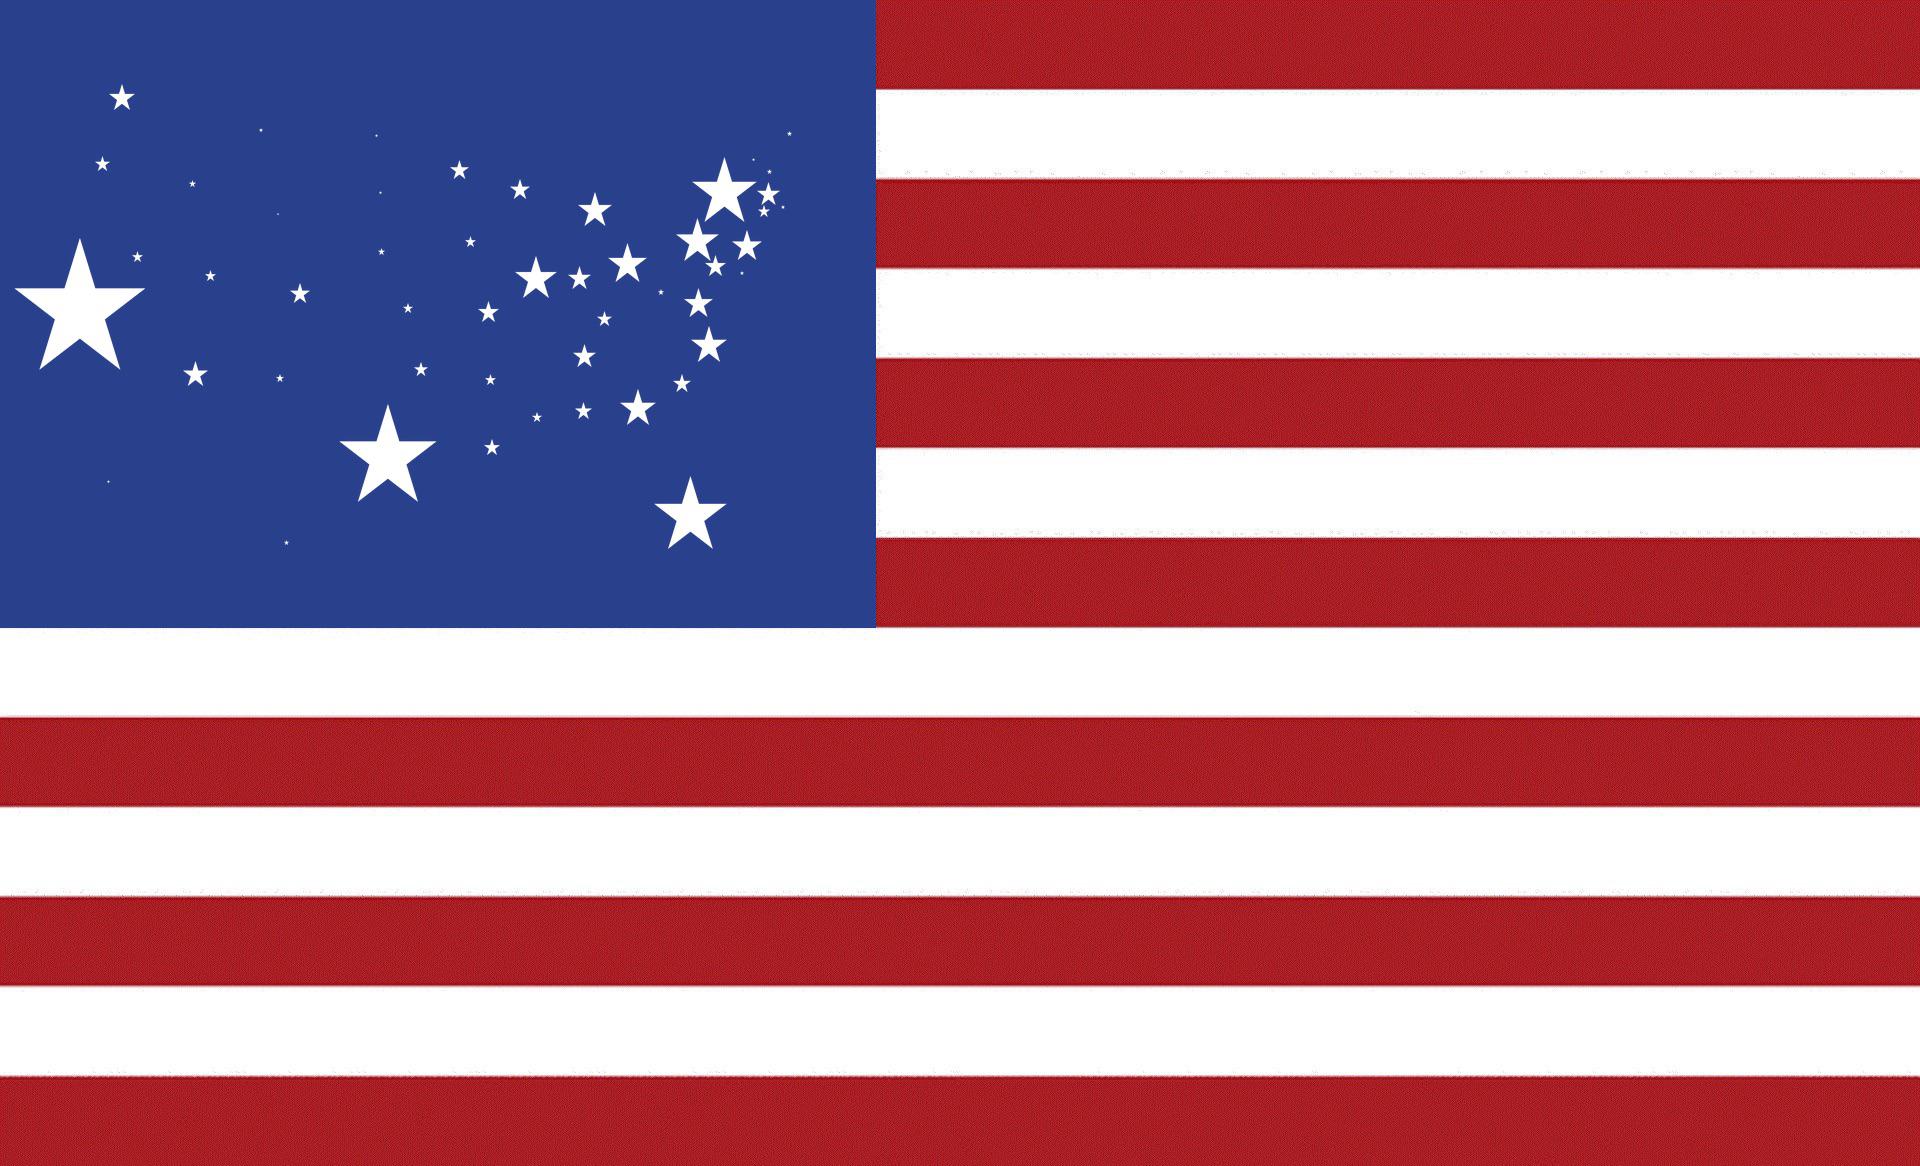 U.S. Flag but each star is scaled proportionally to their state's population and geographic location (roughly). 